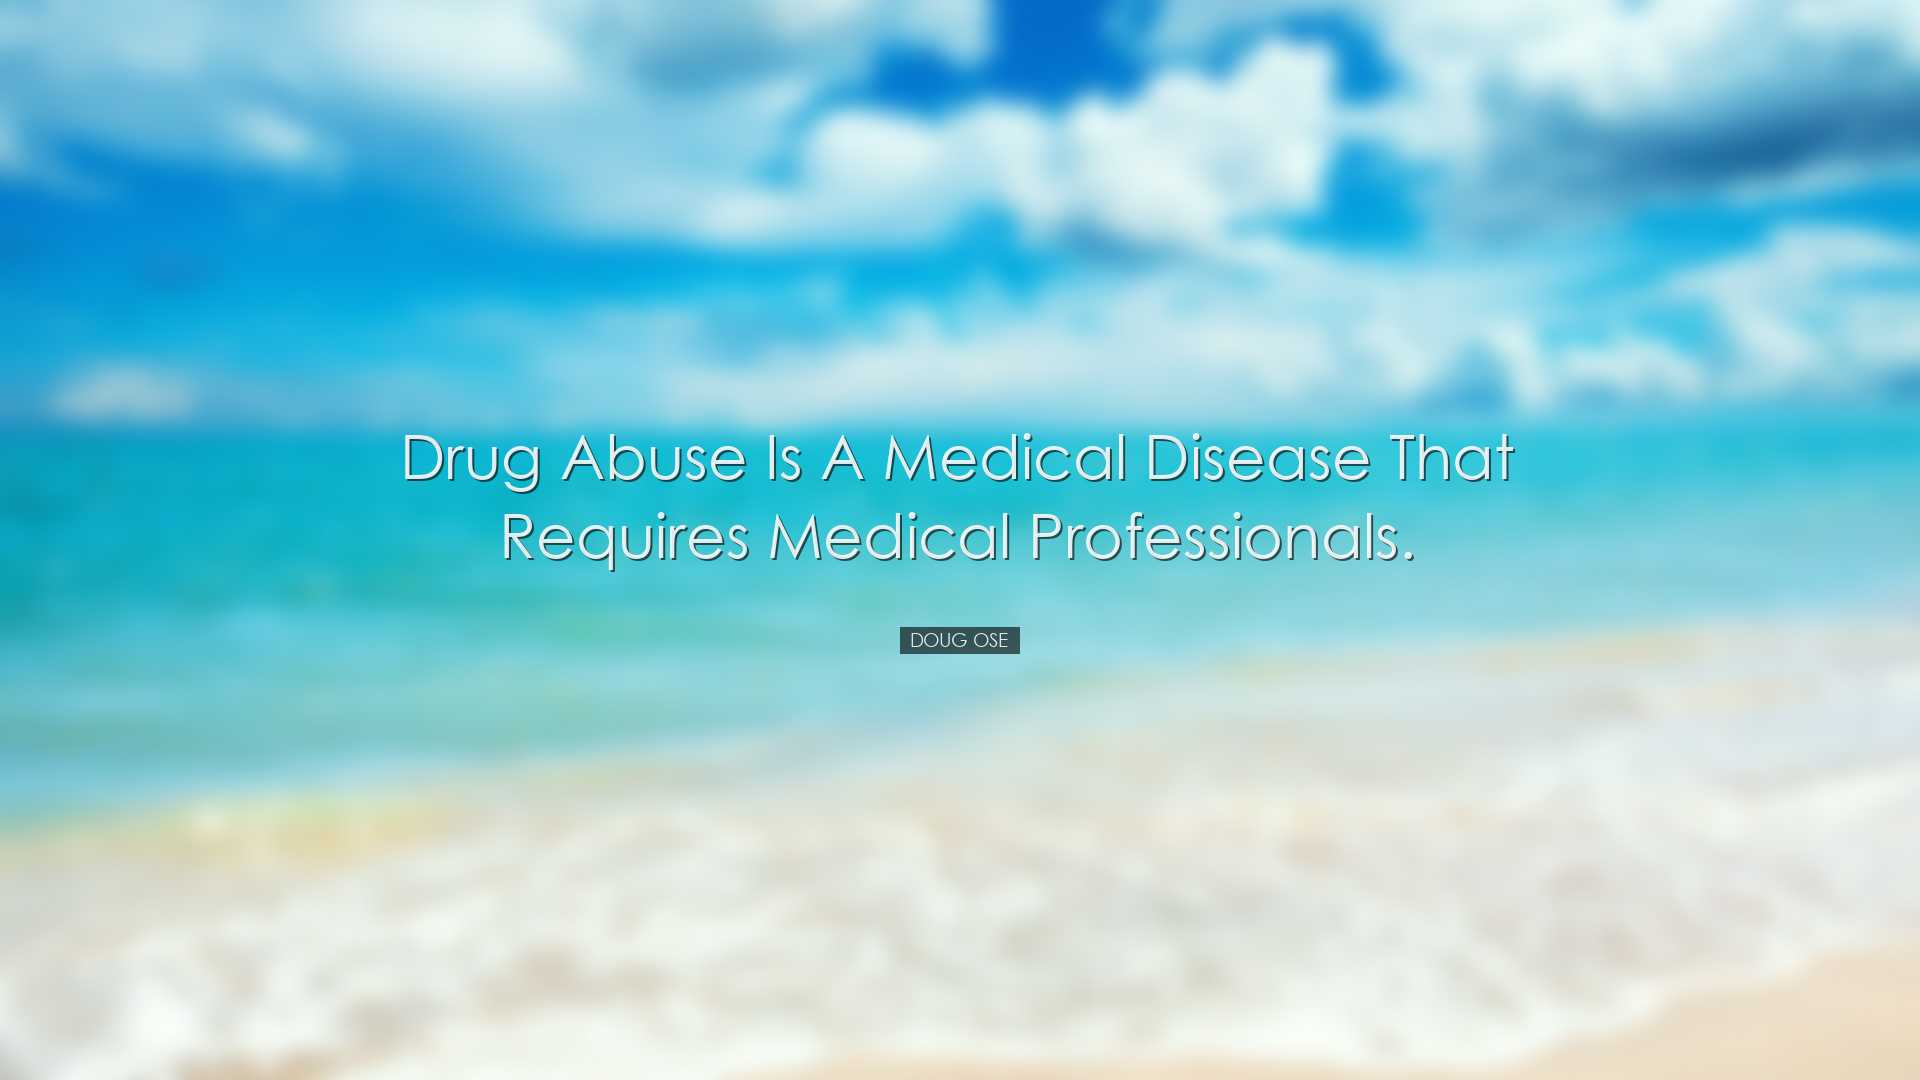 Drug abuse is a medical disease that requires medical professional